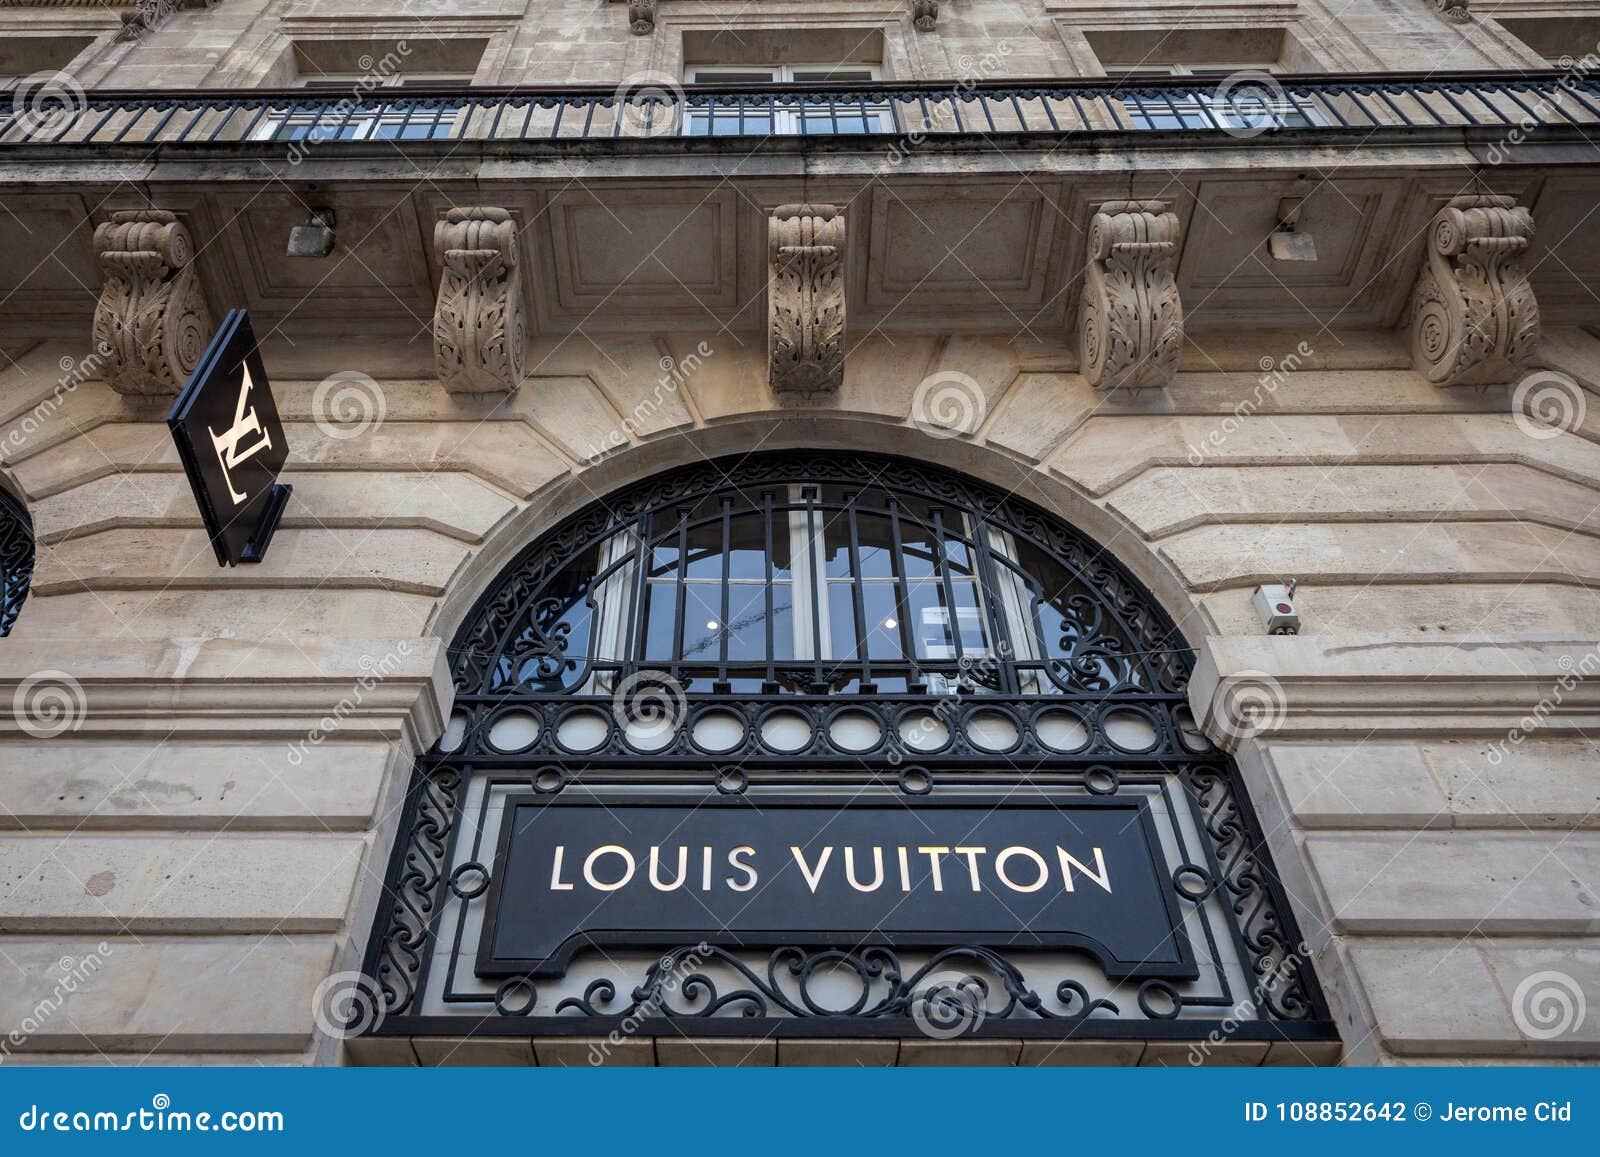 Louis Vuitton Logo on Their Local Shop in Bordeaux. Louis Vuitton is a  Fashion House Manufacturer and Luxury Retail Company Editorial Photography  - Image of bordeaux, architecture: 108852642